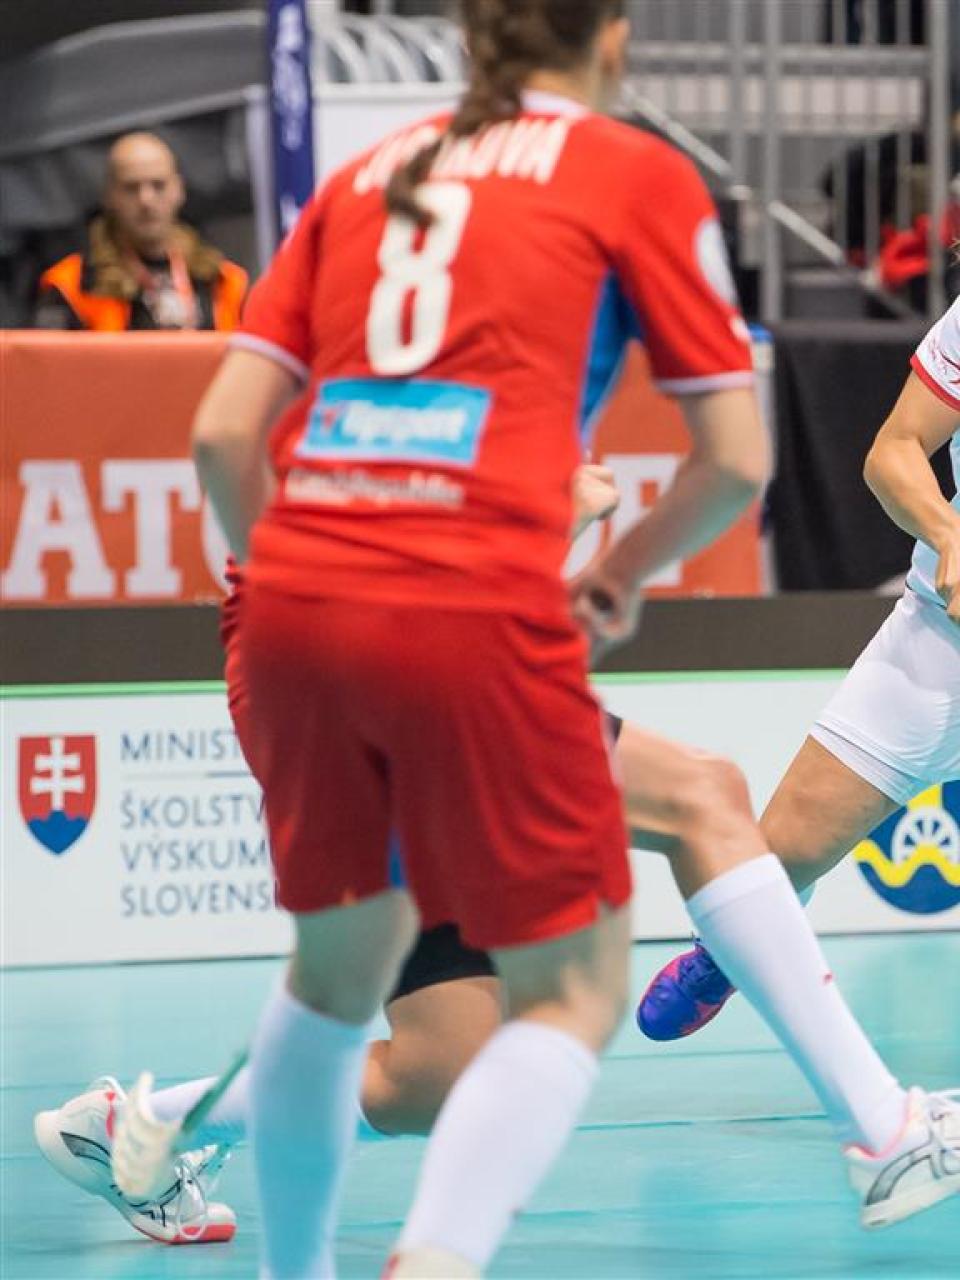 The 2019 Women's World Floorball Championships will take place in Neuchâtel 